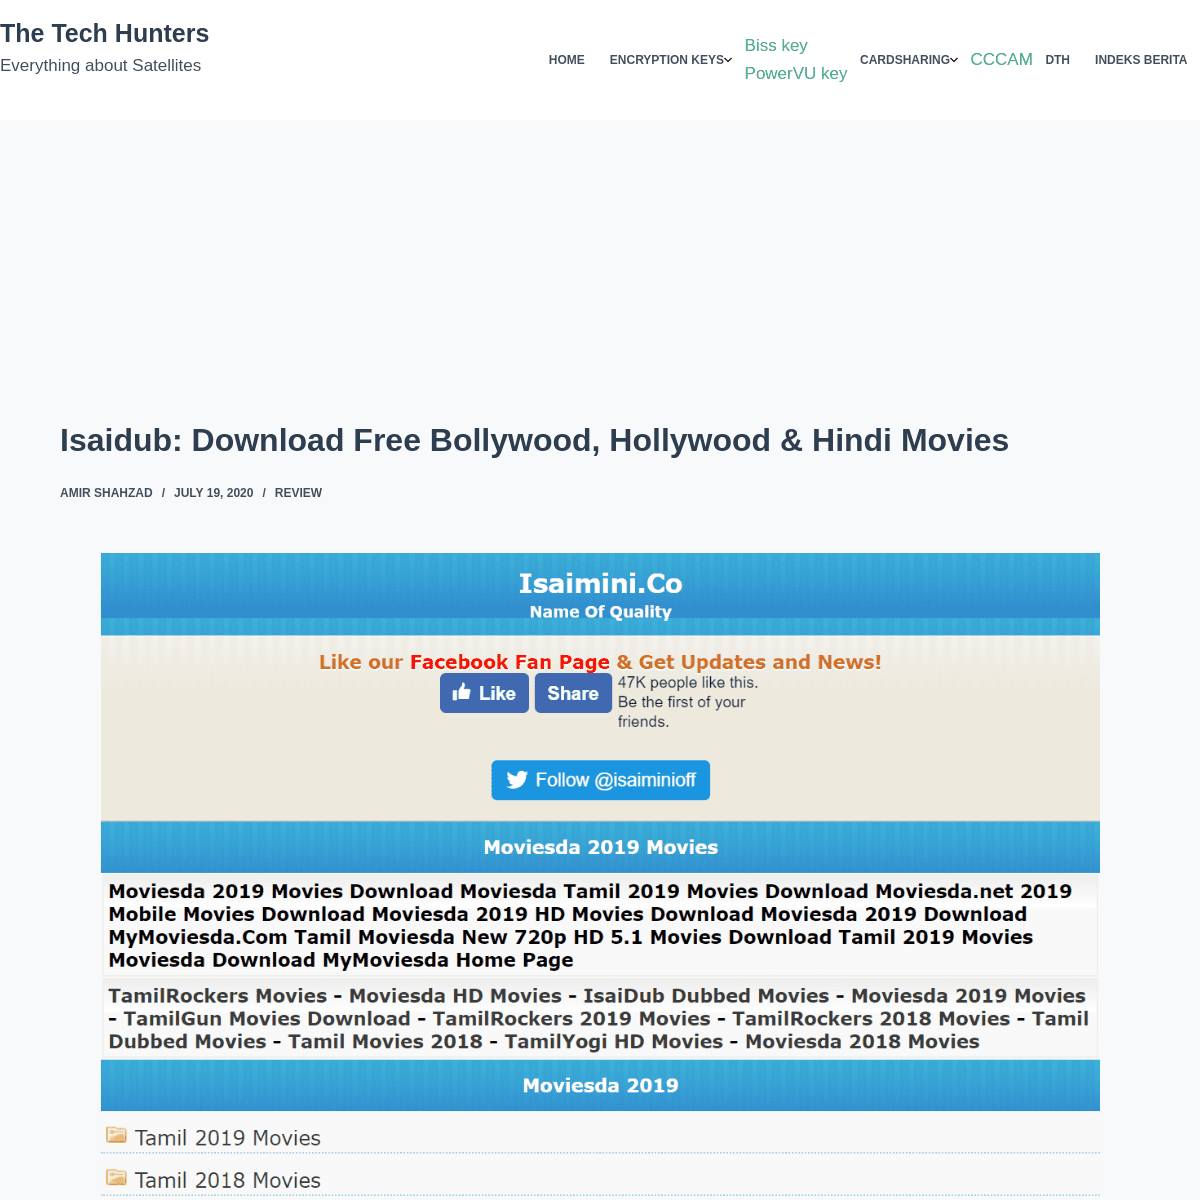 A complete backup of https://thetechhunters.com/isaidub-download-free-movies/